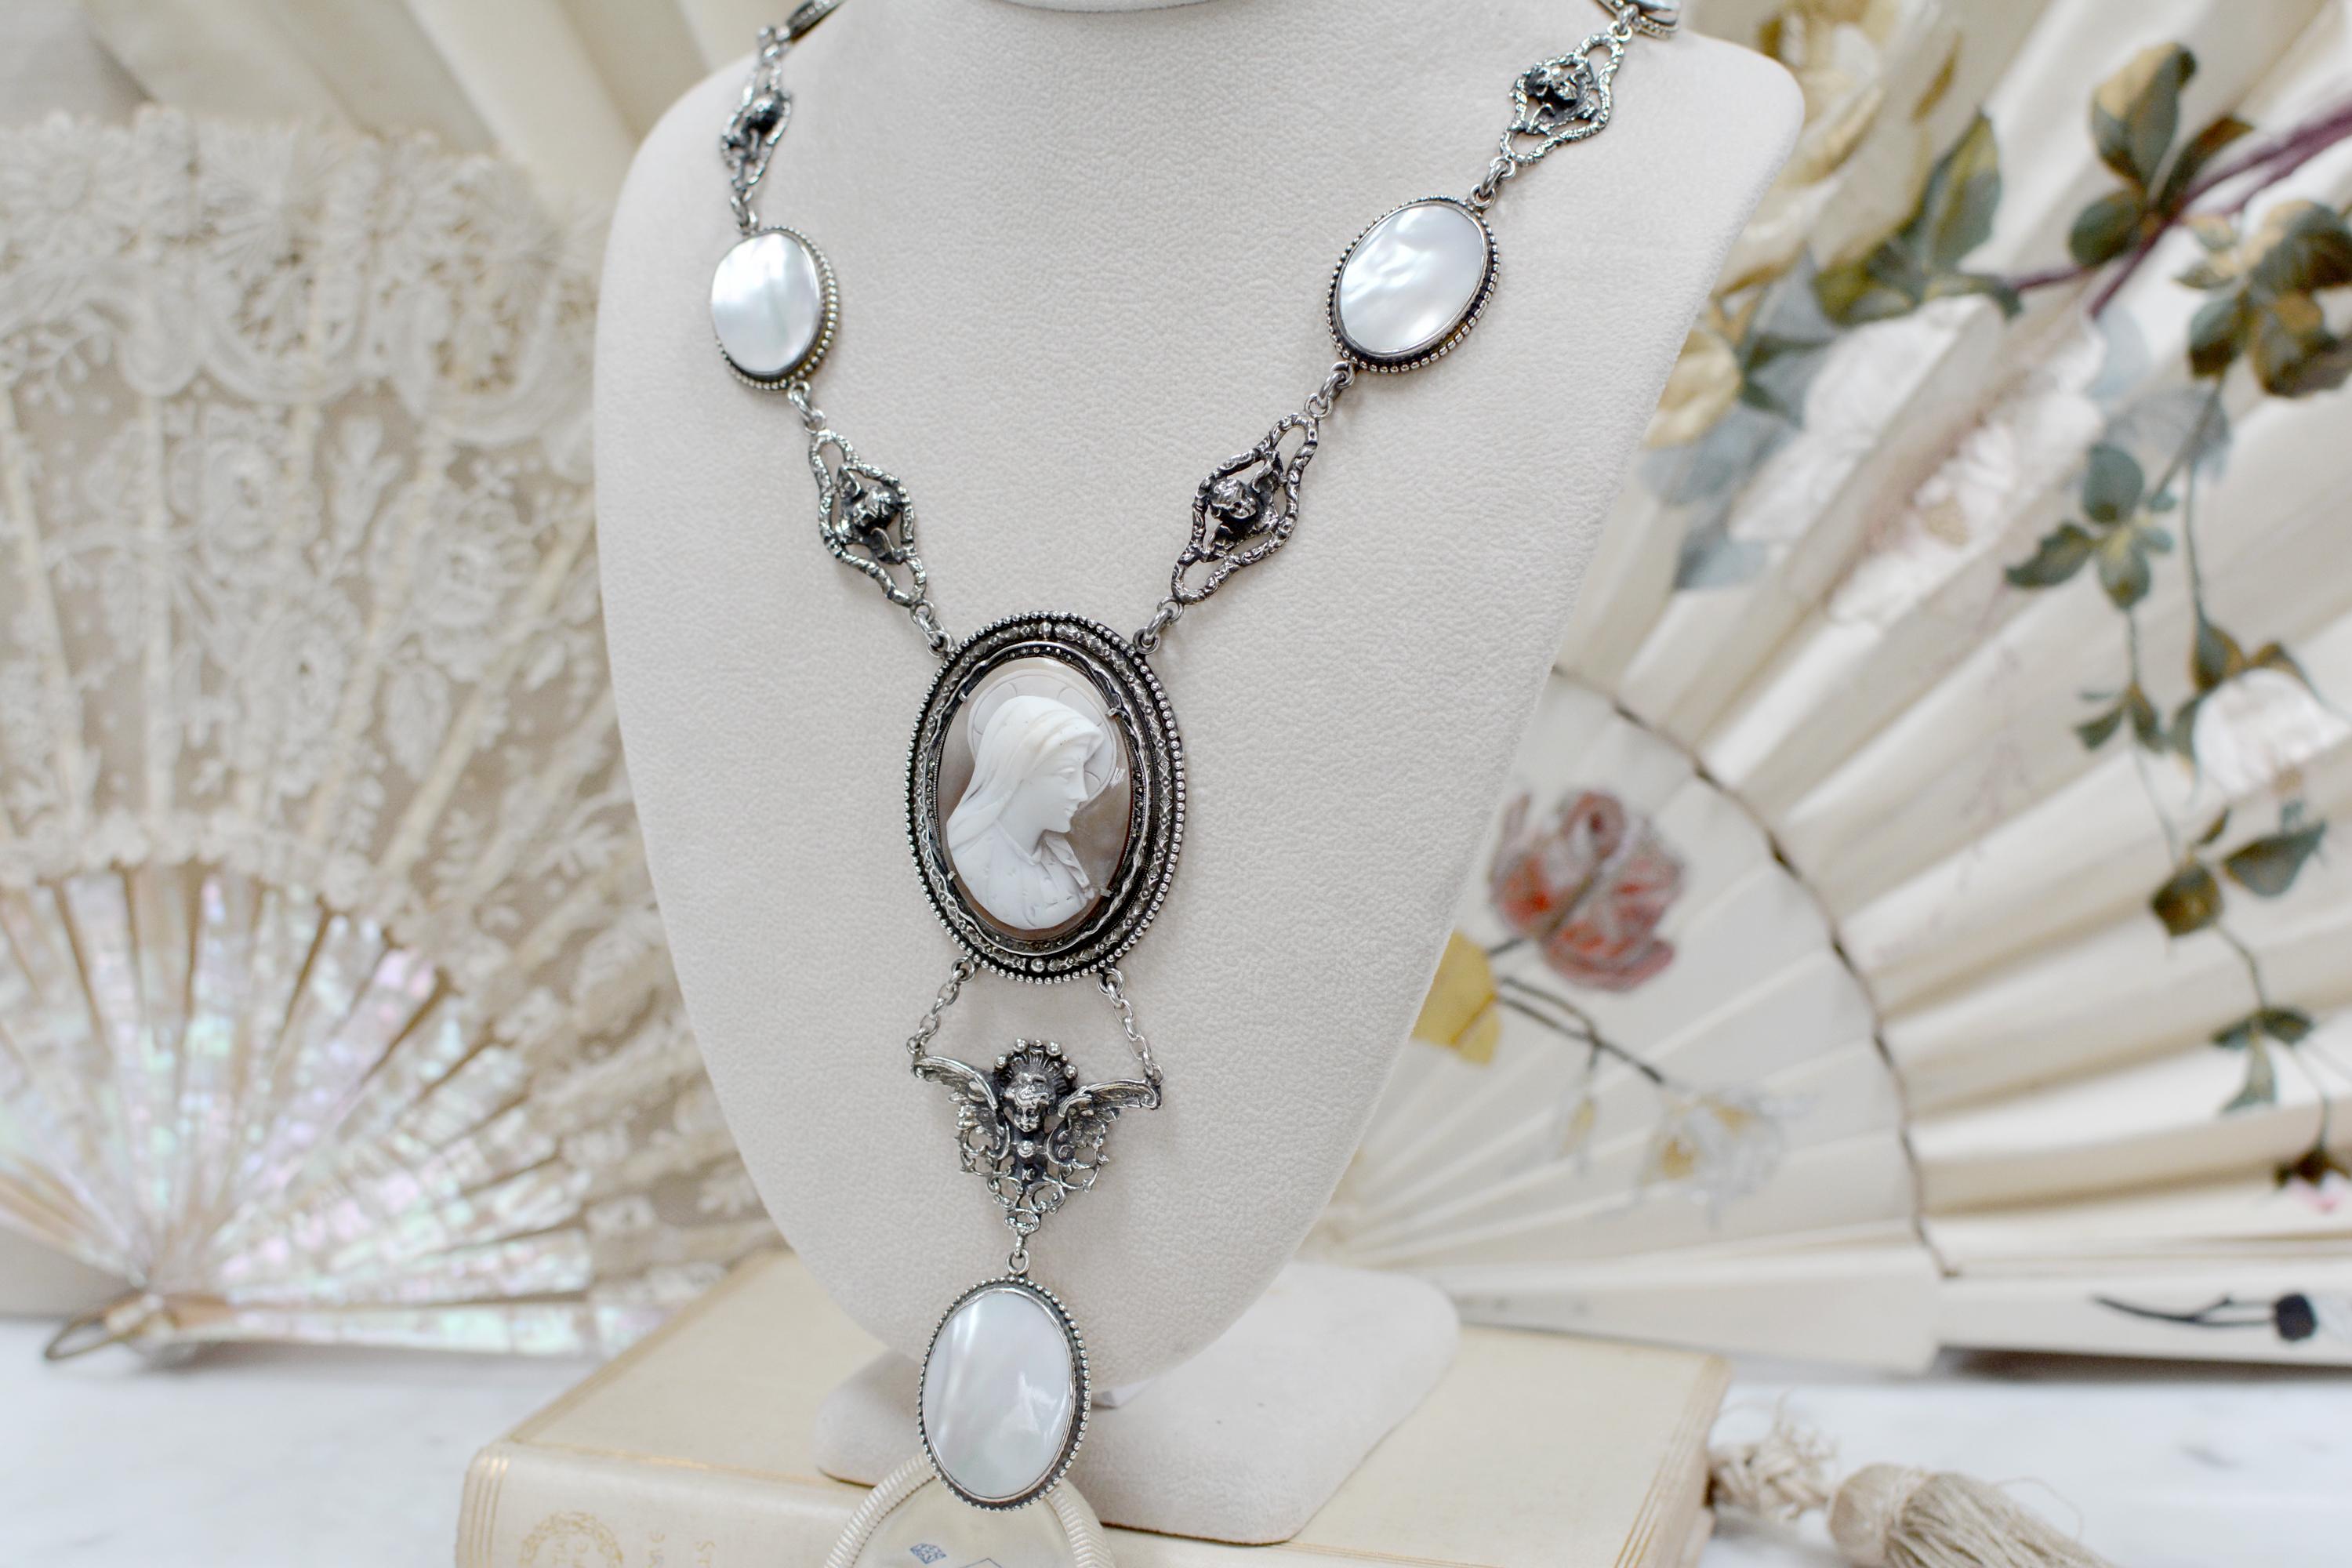 French Cut Jill Garber Antique Saint Mary Cameo Angels Drop Necklace with Mother of Pearl For Sale